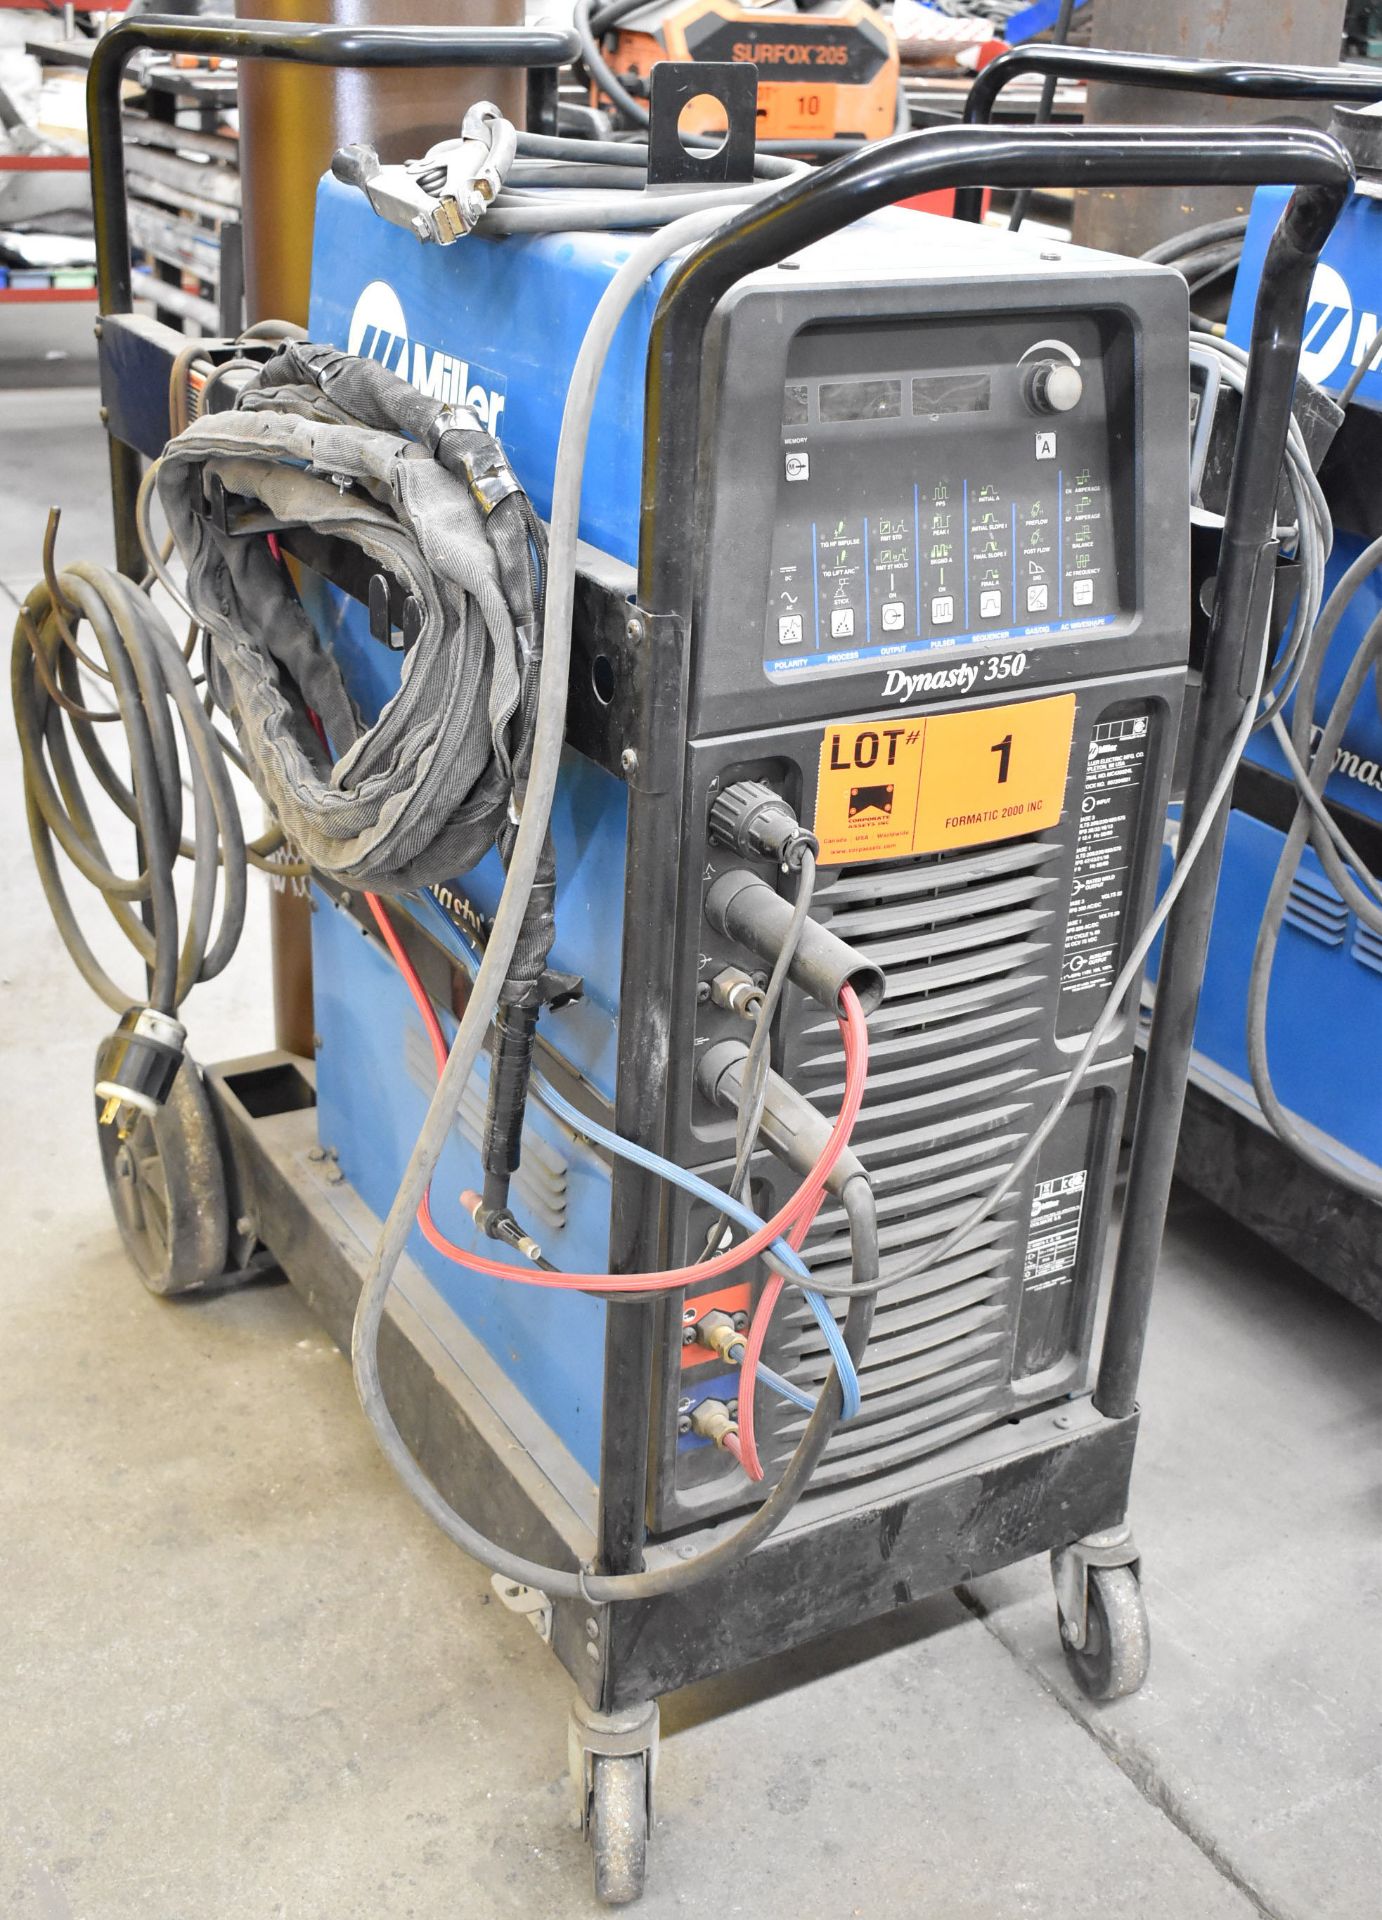 MILLER (2012) DYNASTY 350 PORTABLE DIGITAL WATER-COOLED TIG WELDERS WITH COOLMATE 3.5 WATER